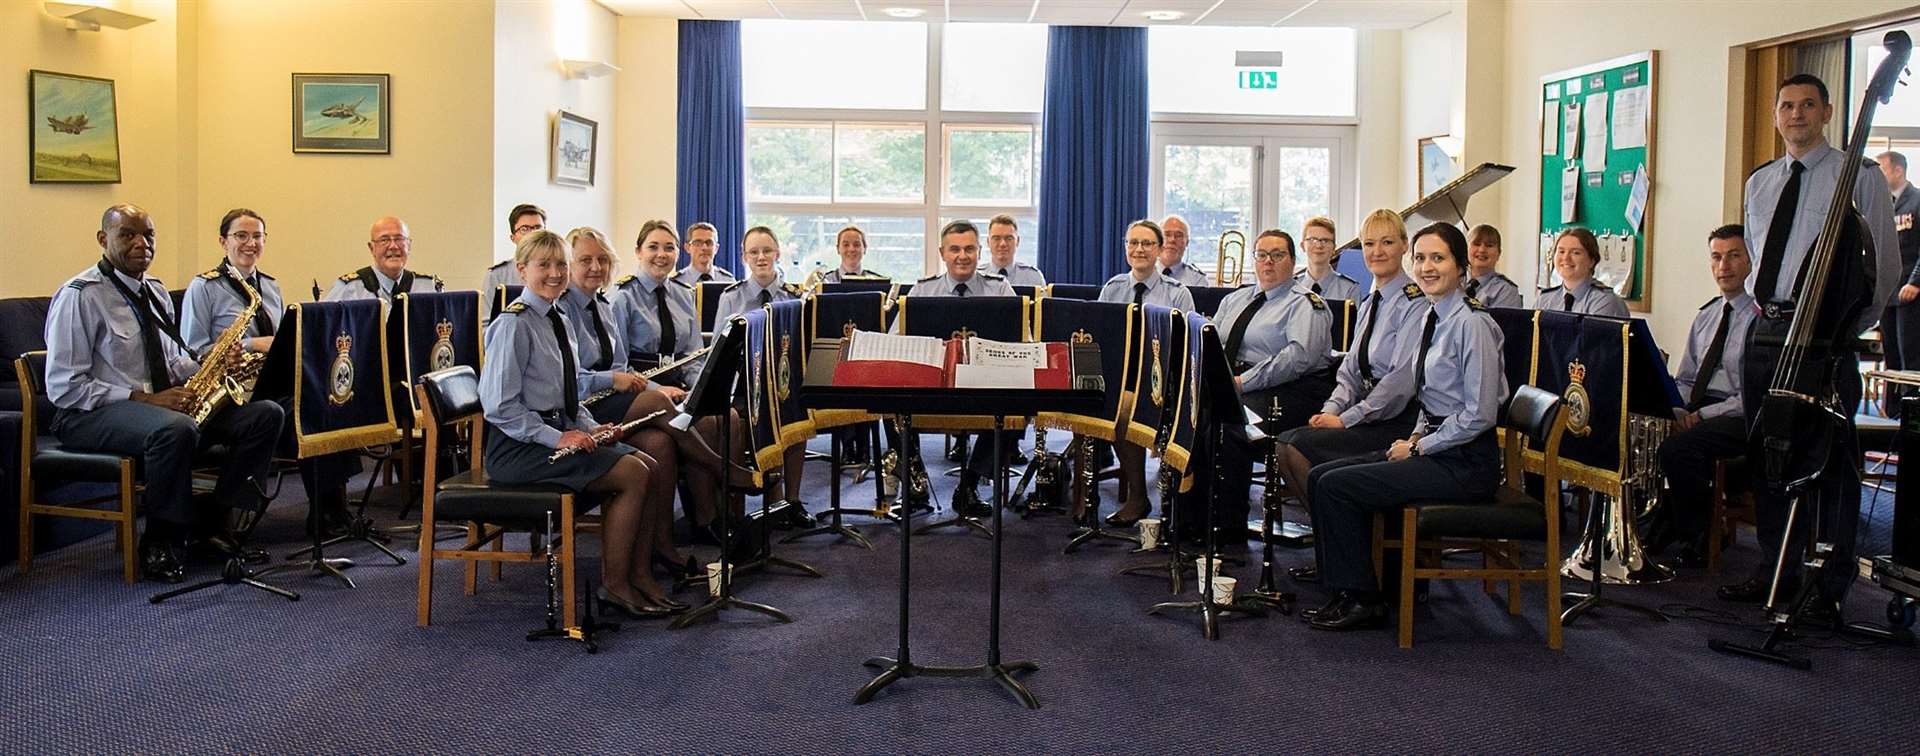 RAF Lossiemouth's Voluntary Band